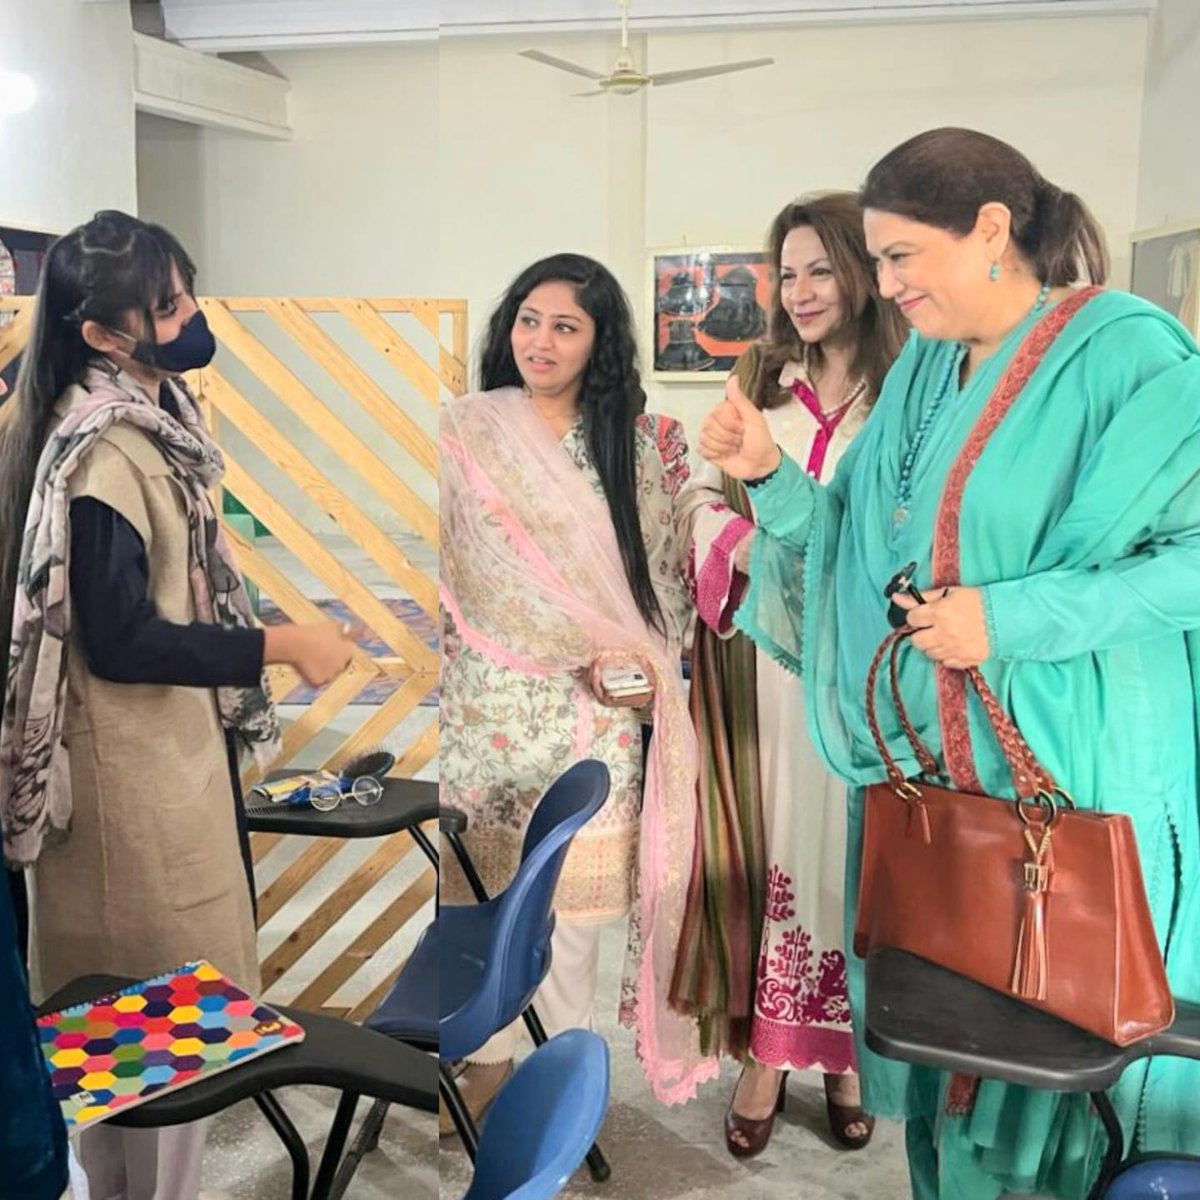 A very inspiring moment to see the differently abled girl students learning various skills. Well done APWA Multan for your determination in building & brightening the future of these young girls. #WomenEmpowerment